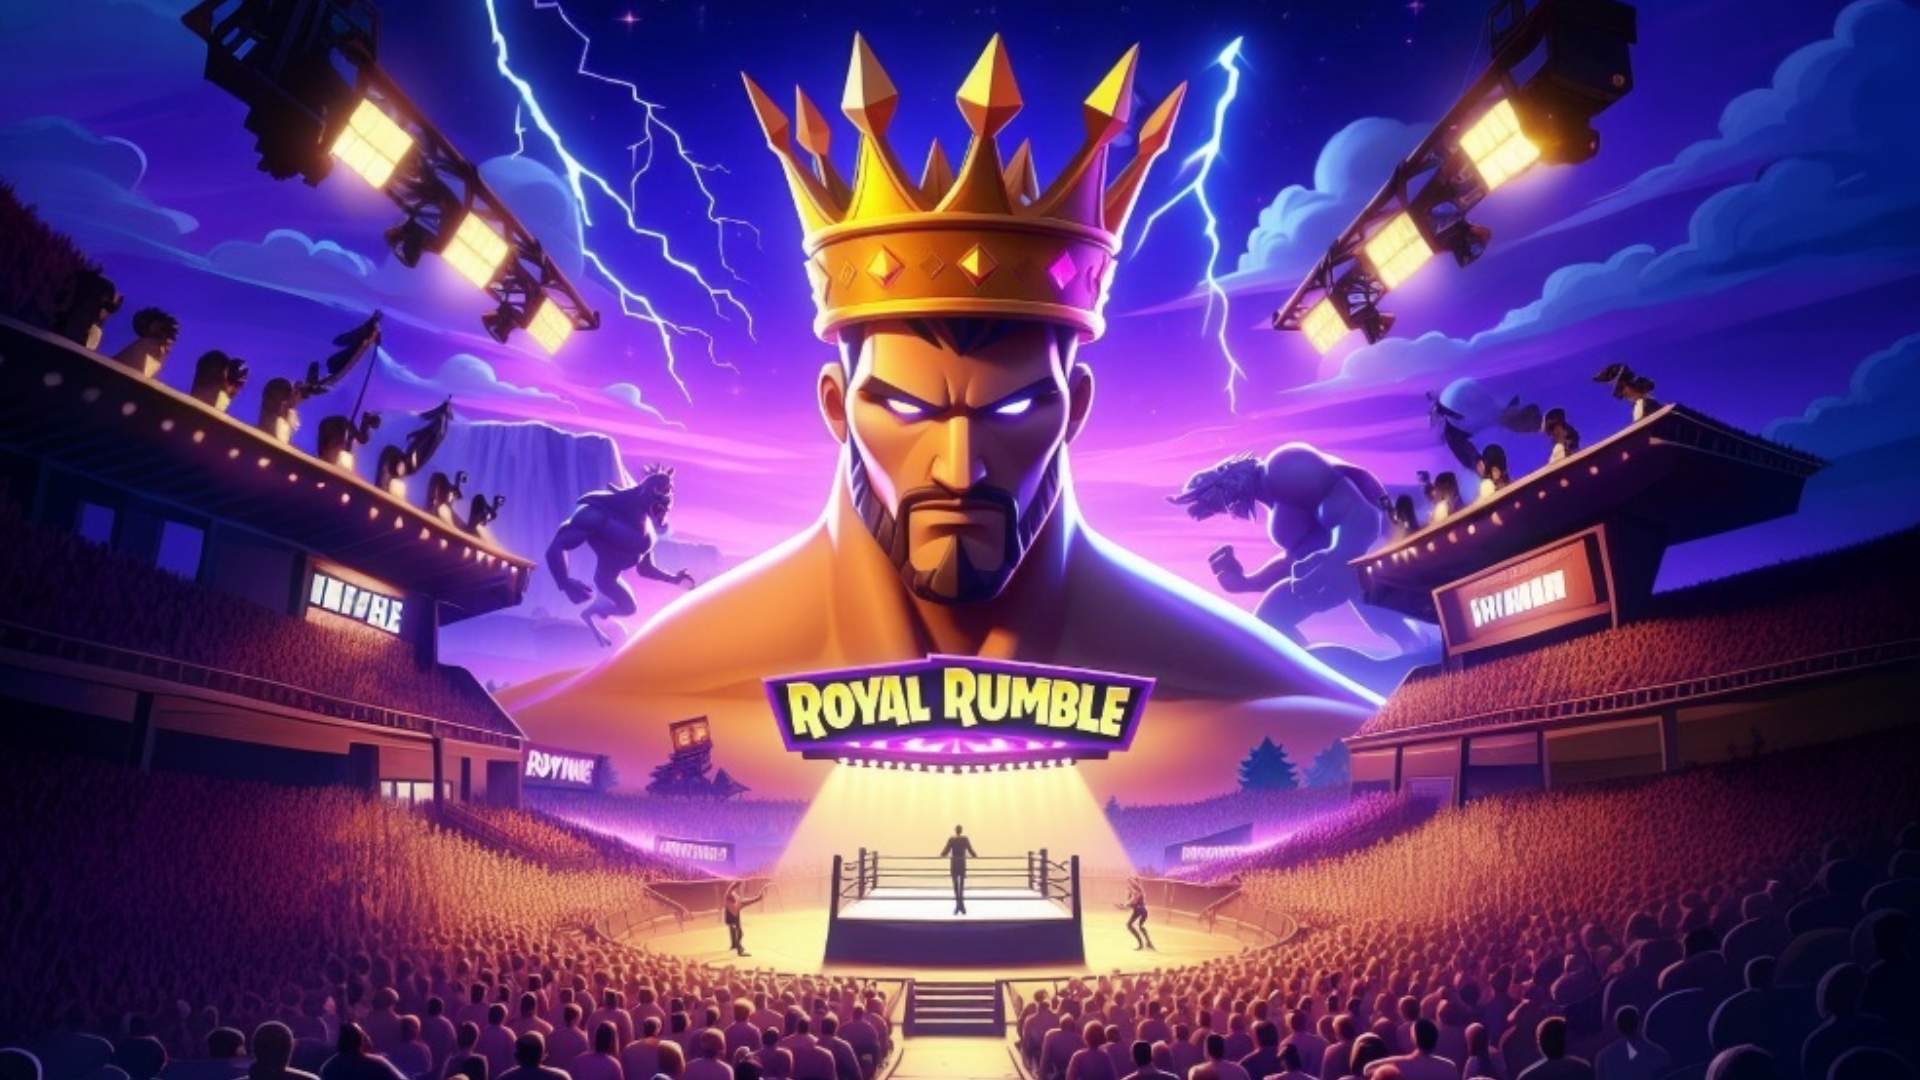 👑 FIRST PERSON ROYAL RUMBLE [RANKED] 0341-6239-4515